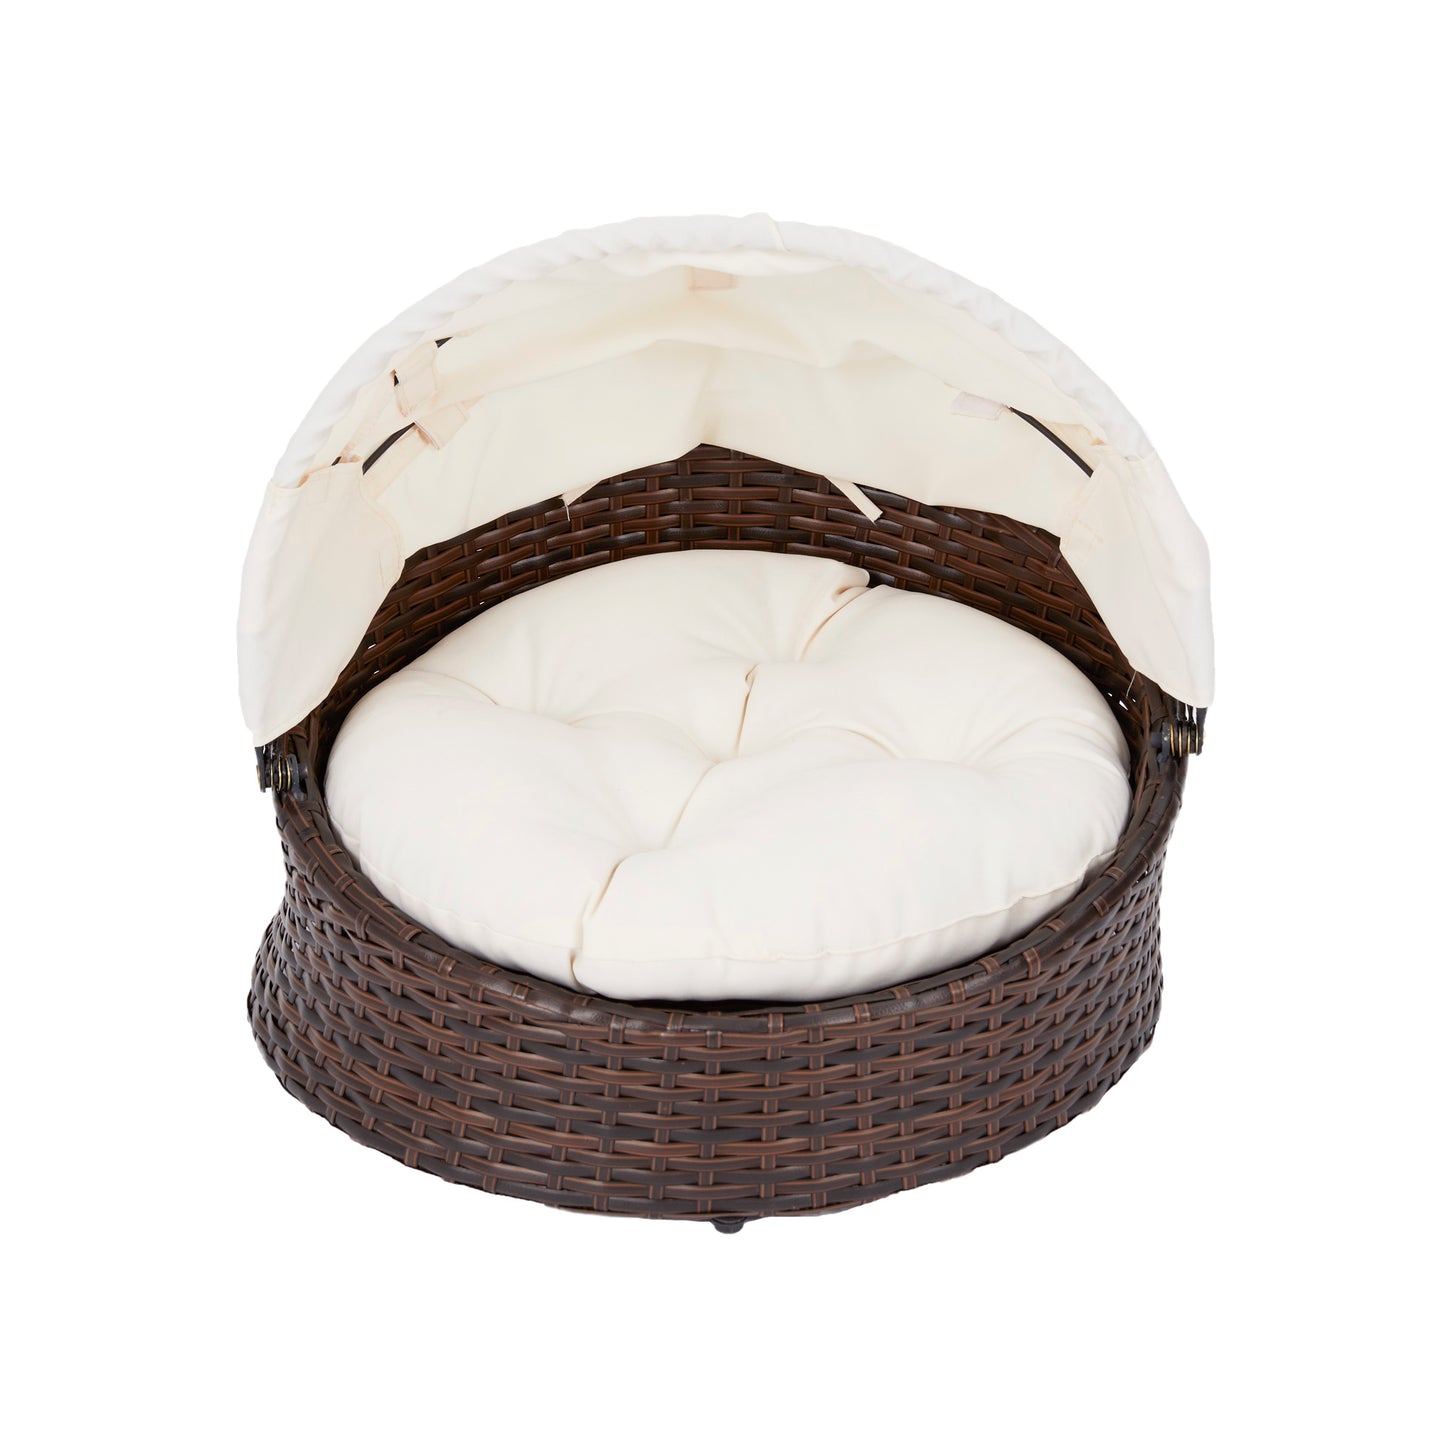 Teamson Pets Woven Round Dog or Cat Bed & Cushion